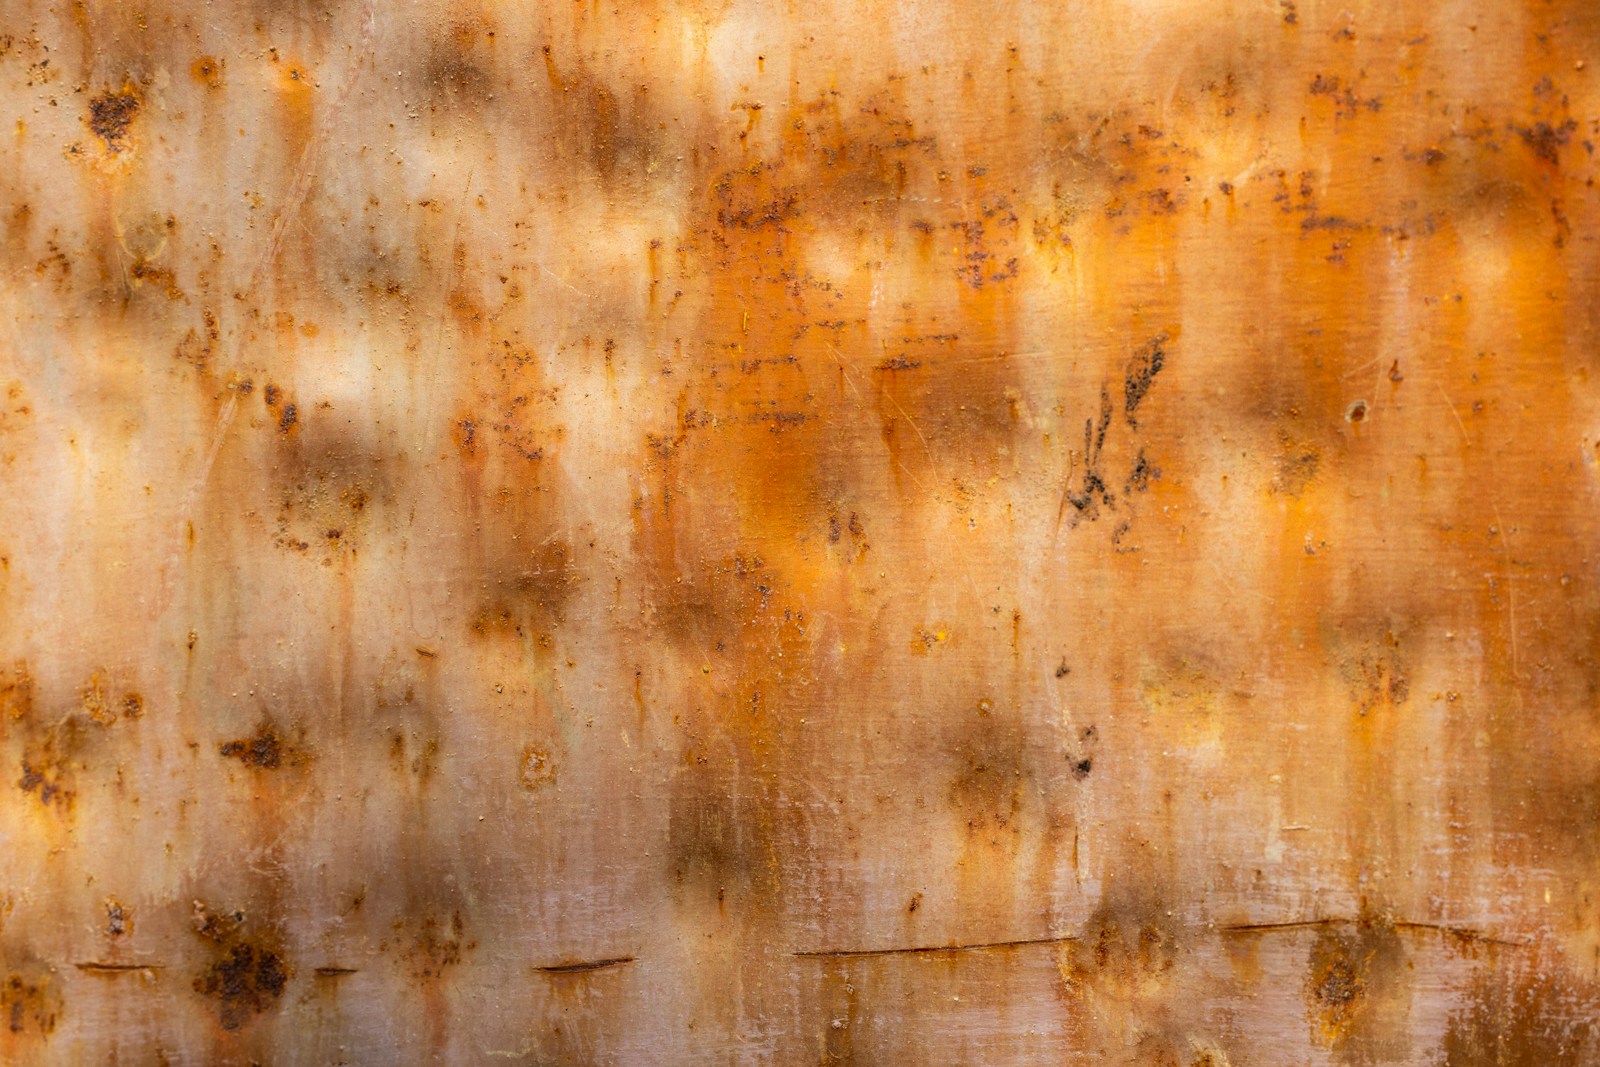 a rusted metal surface with yellow and brown colors